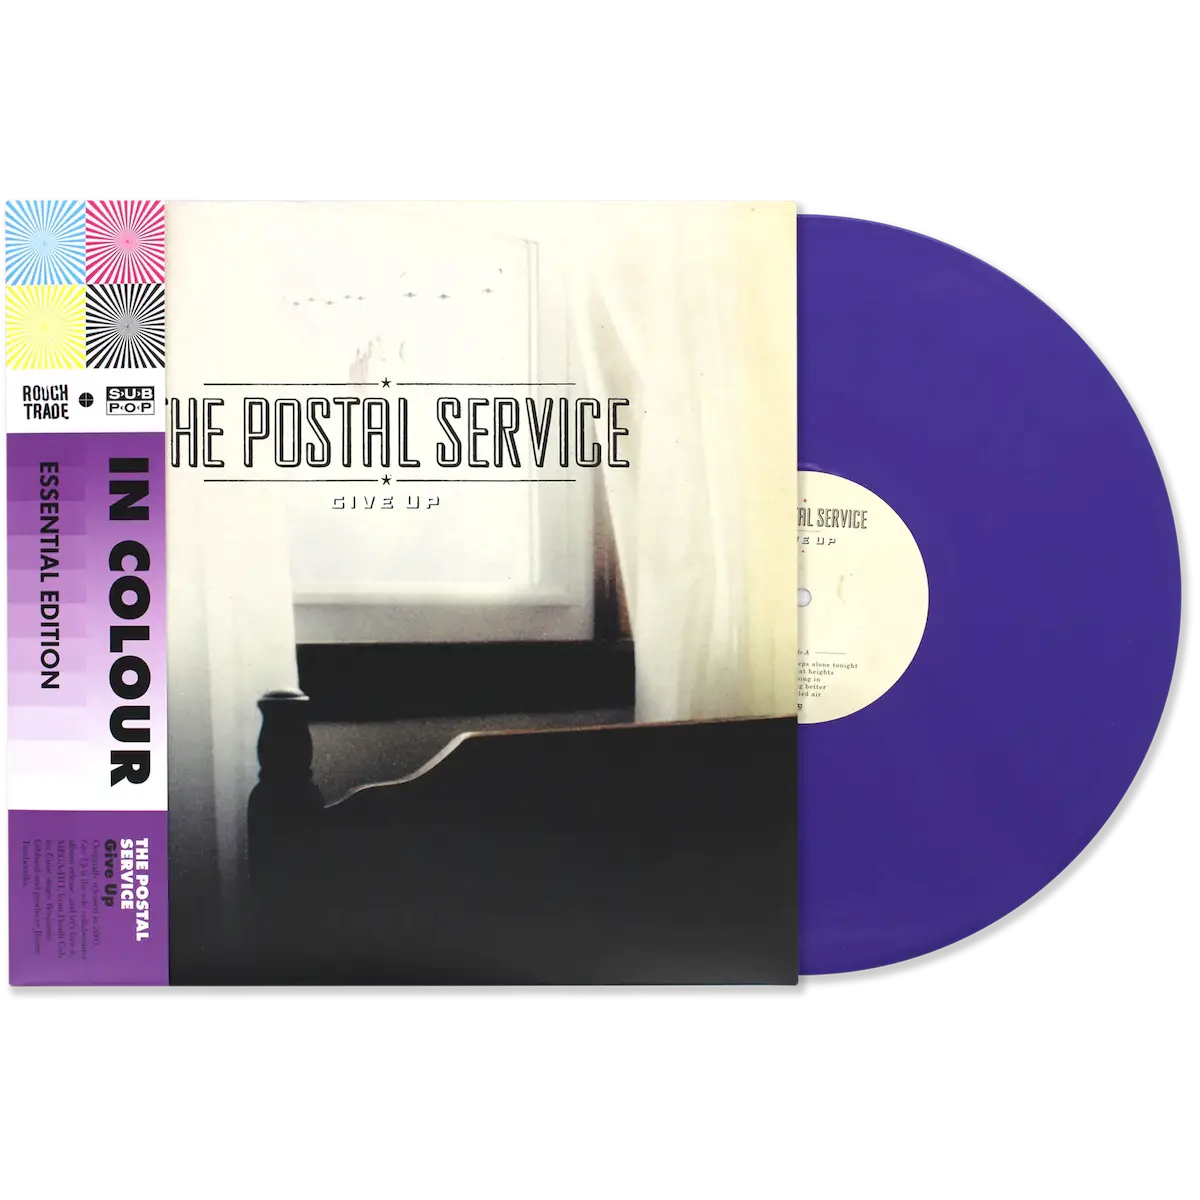 Album artwork for Give Up by The Postal Service